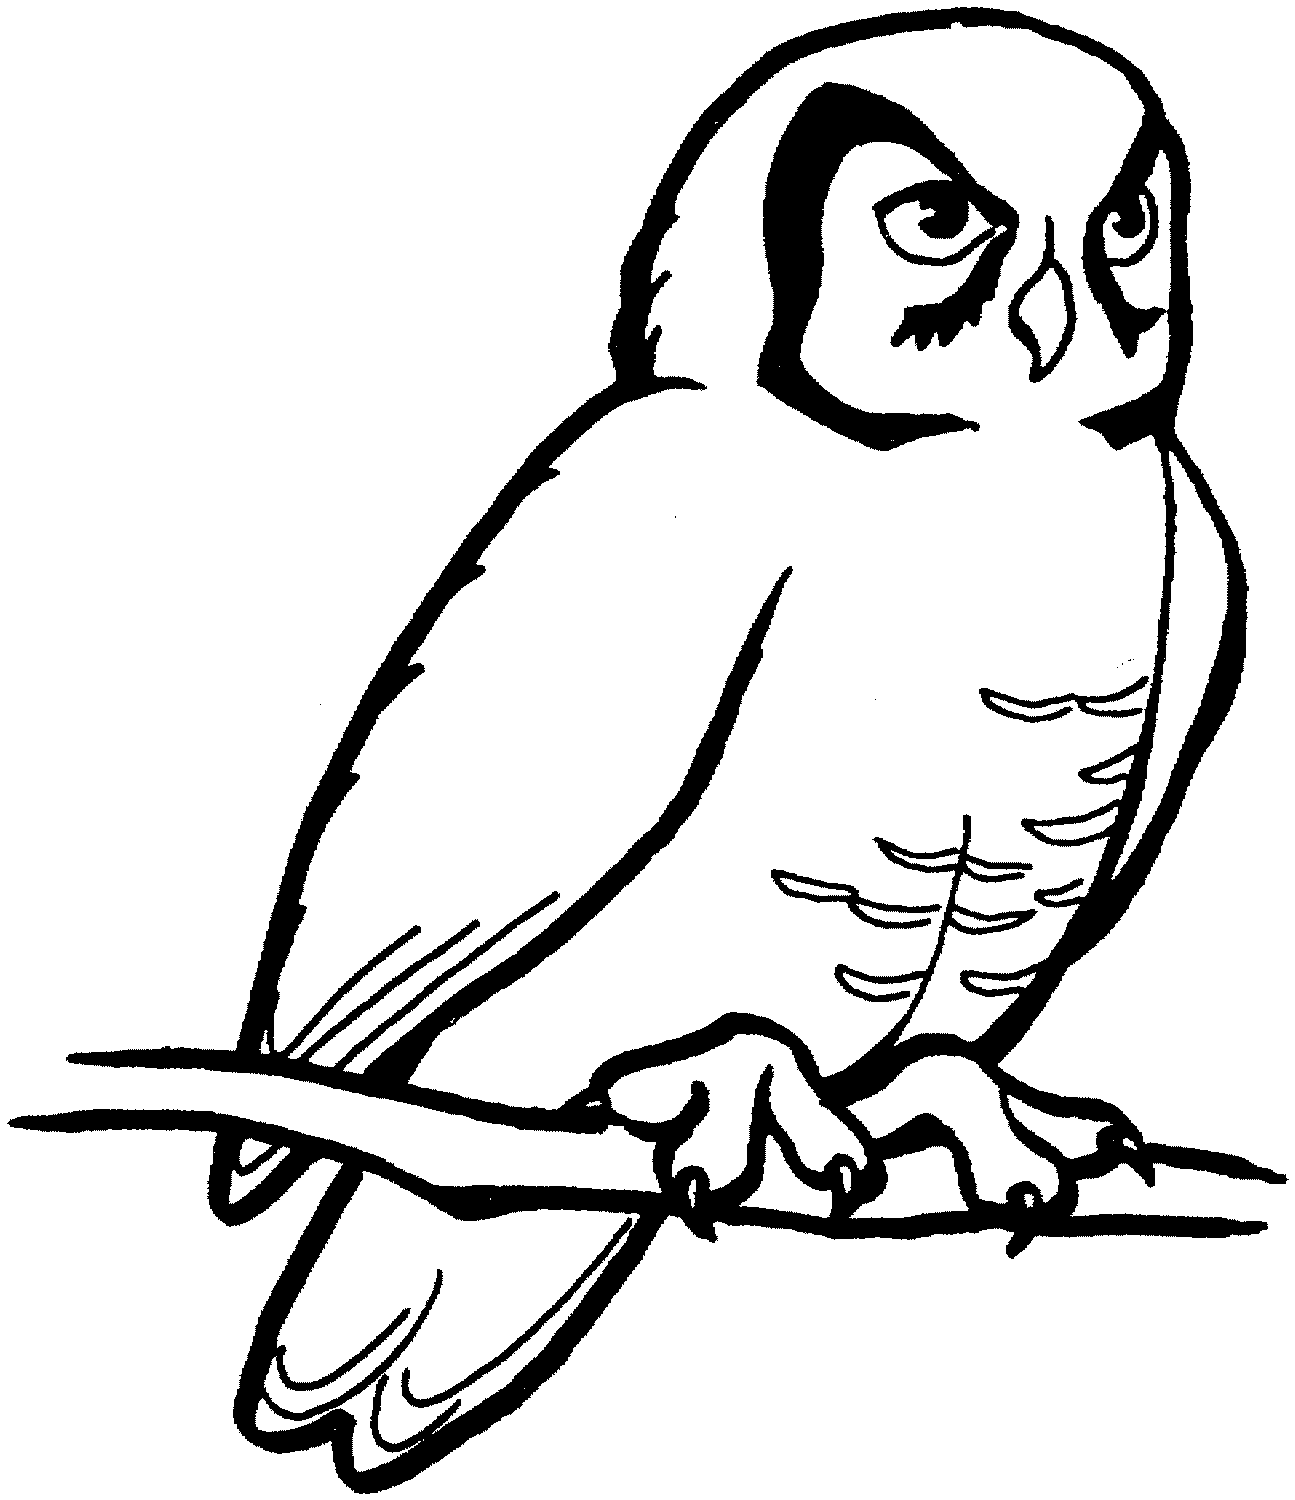 Owl Clipart Black And White Clipart Panda Free Clipart Images